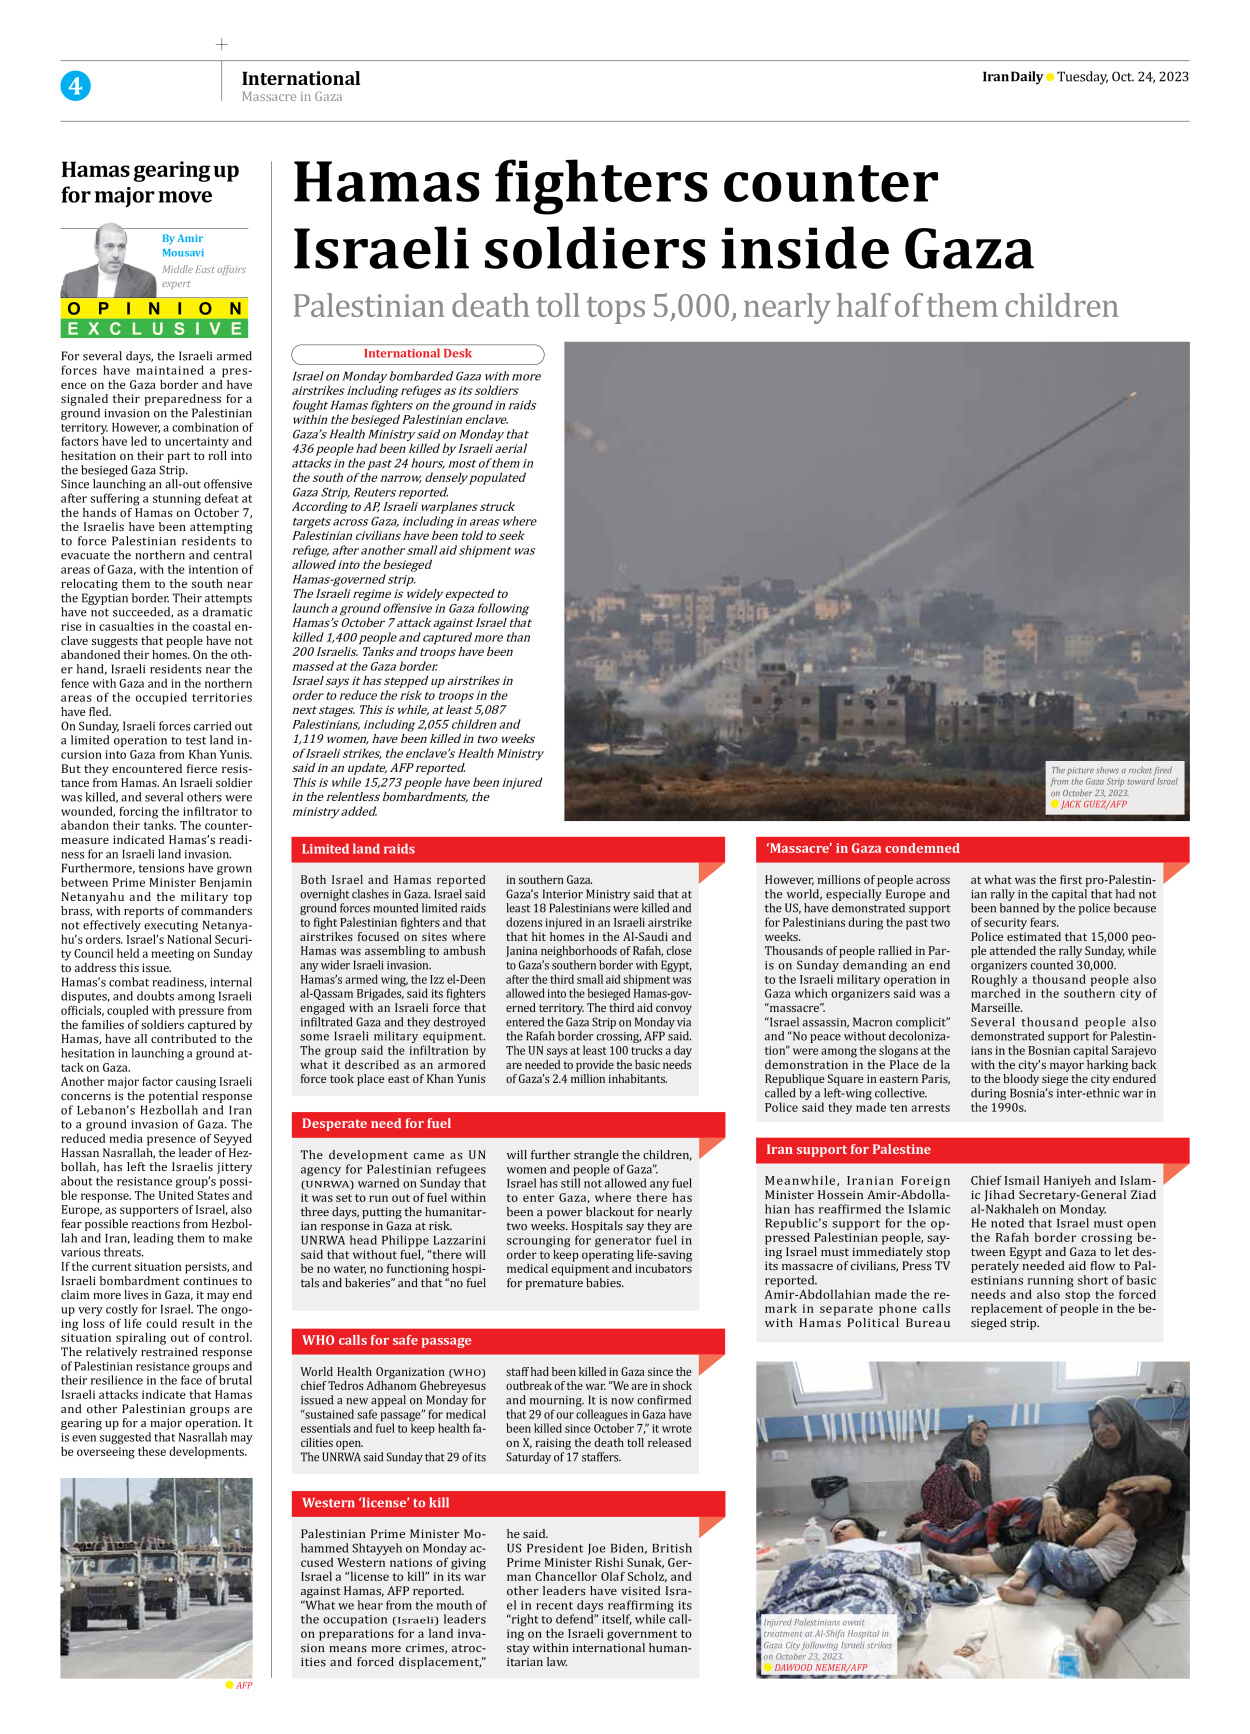 Iran Daily - Number Seven Thousand Four Hundred and Sixteen - 24 October 2023 - Page 4